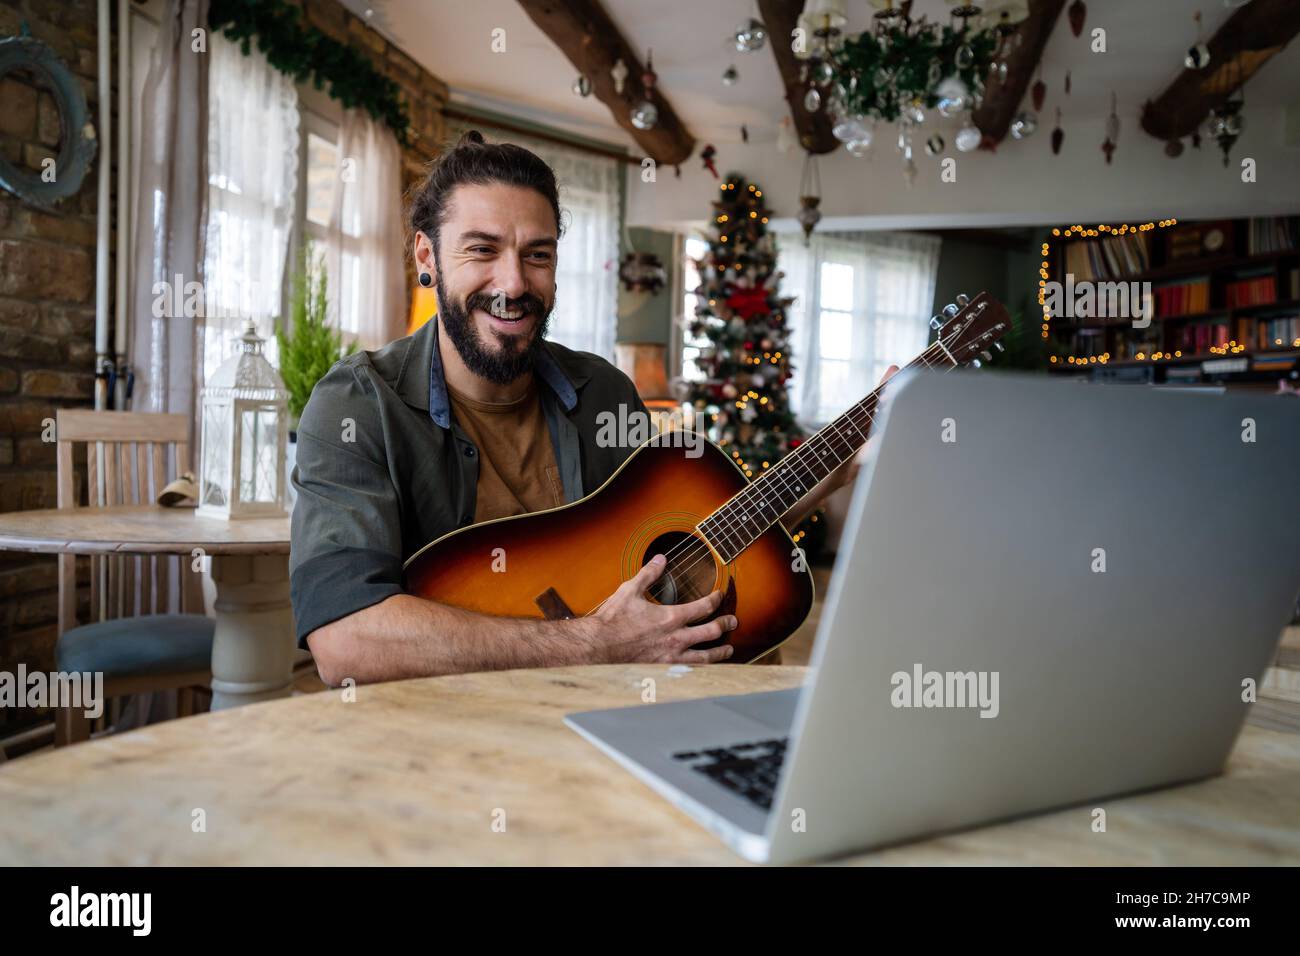 Portrait of a man taking guitar lessons online in a room at home Stock Photo